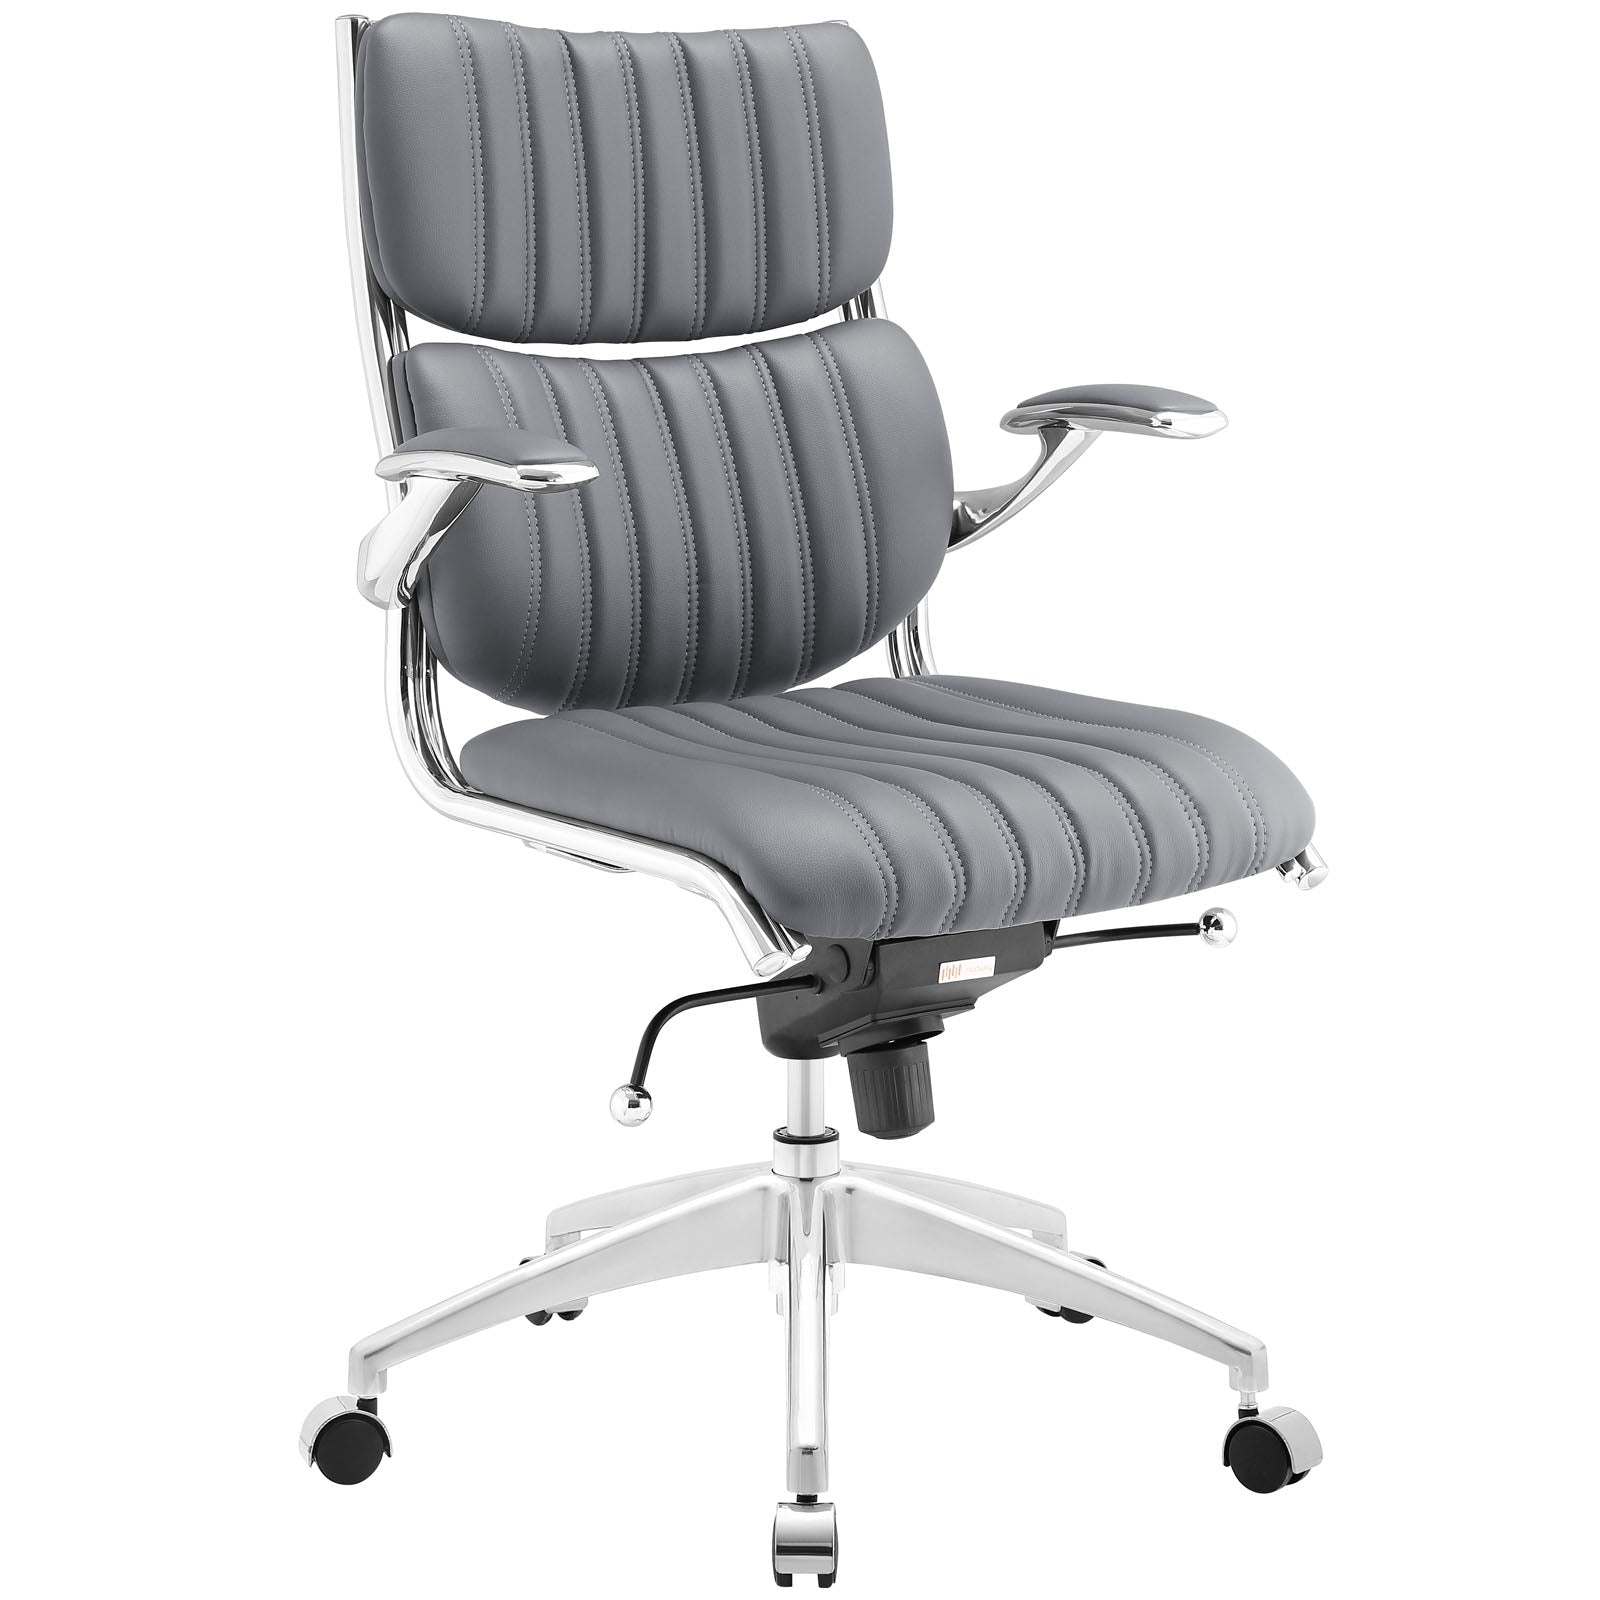 Oxford Office Chair